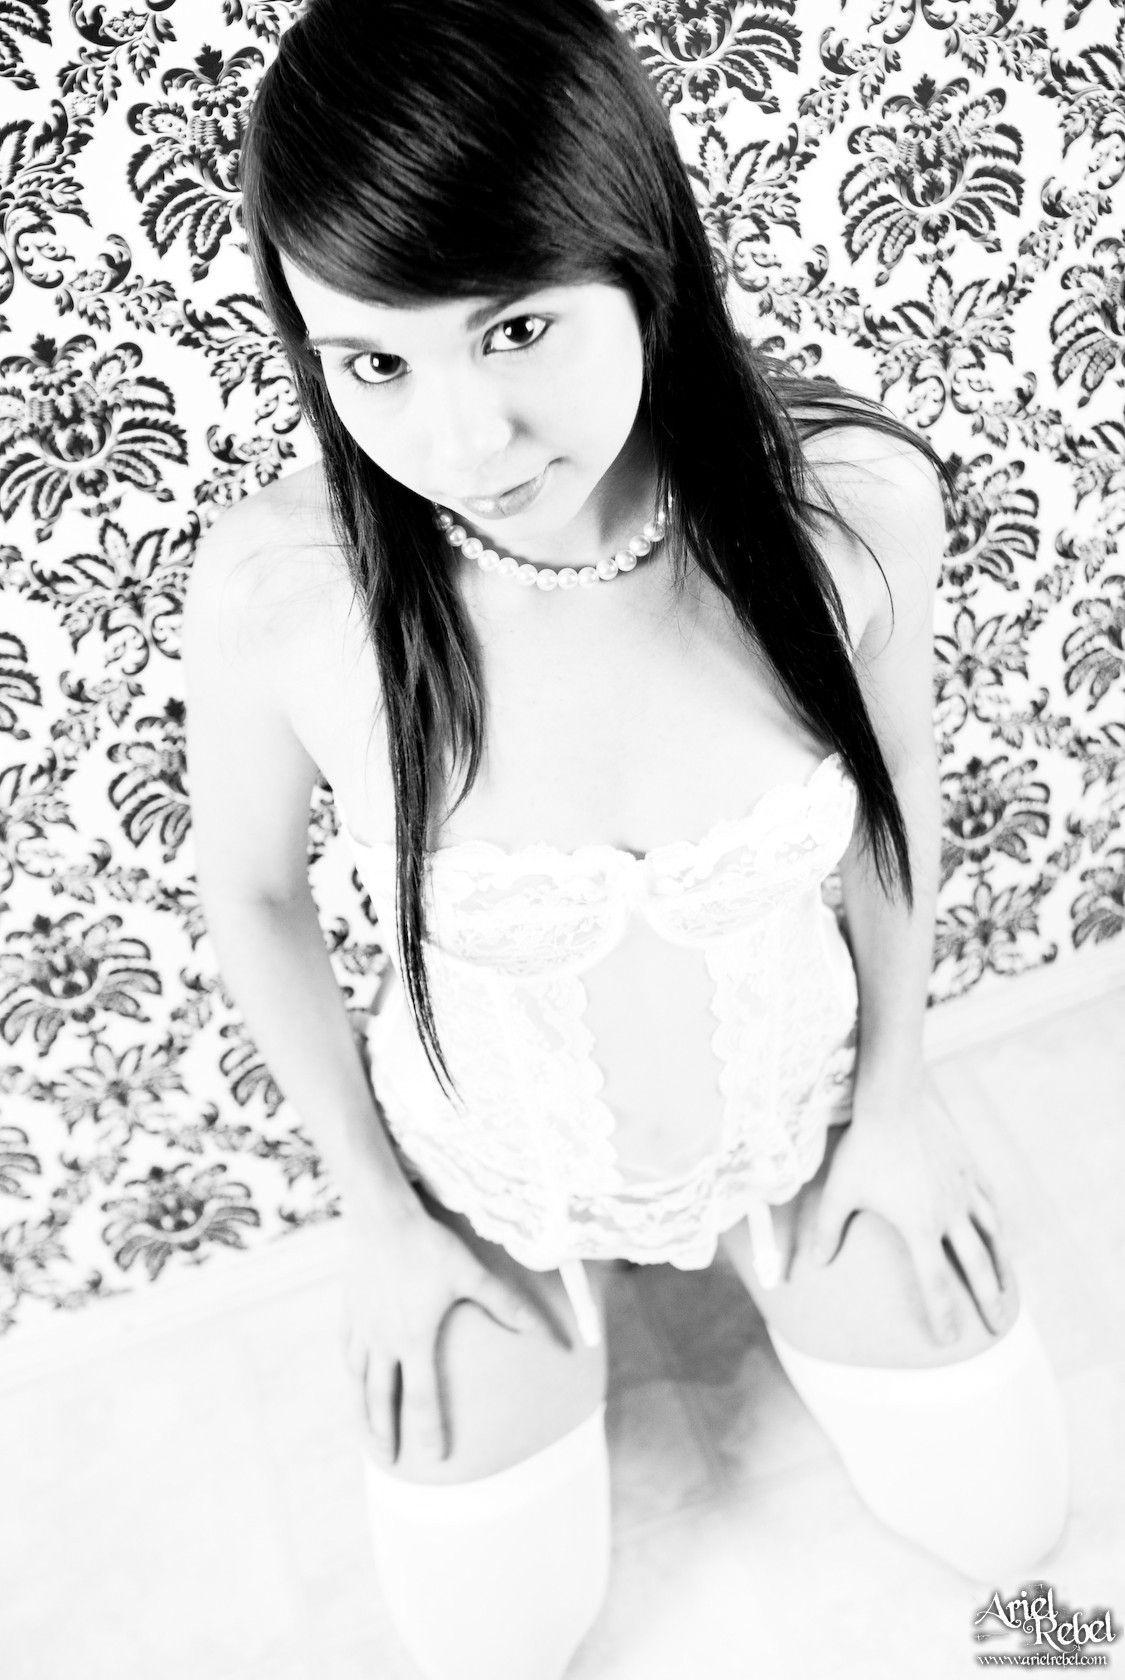 Pictures of Ariel Rebel looking vintage in black and white #53299678